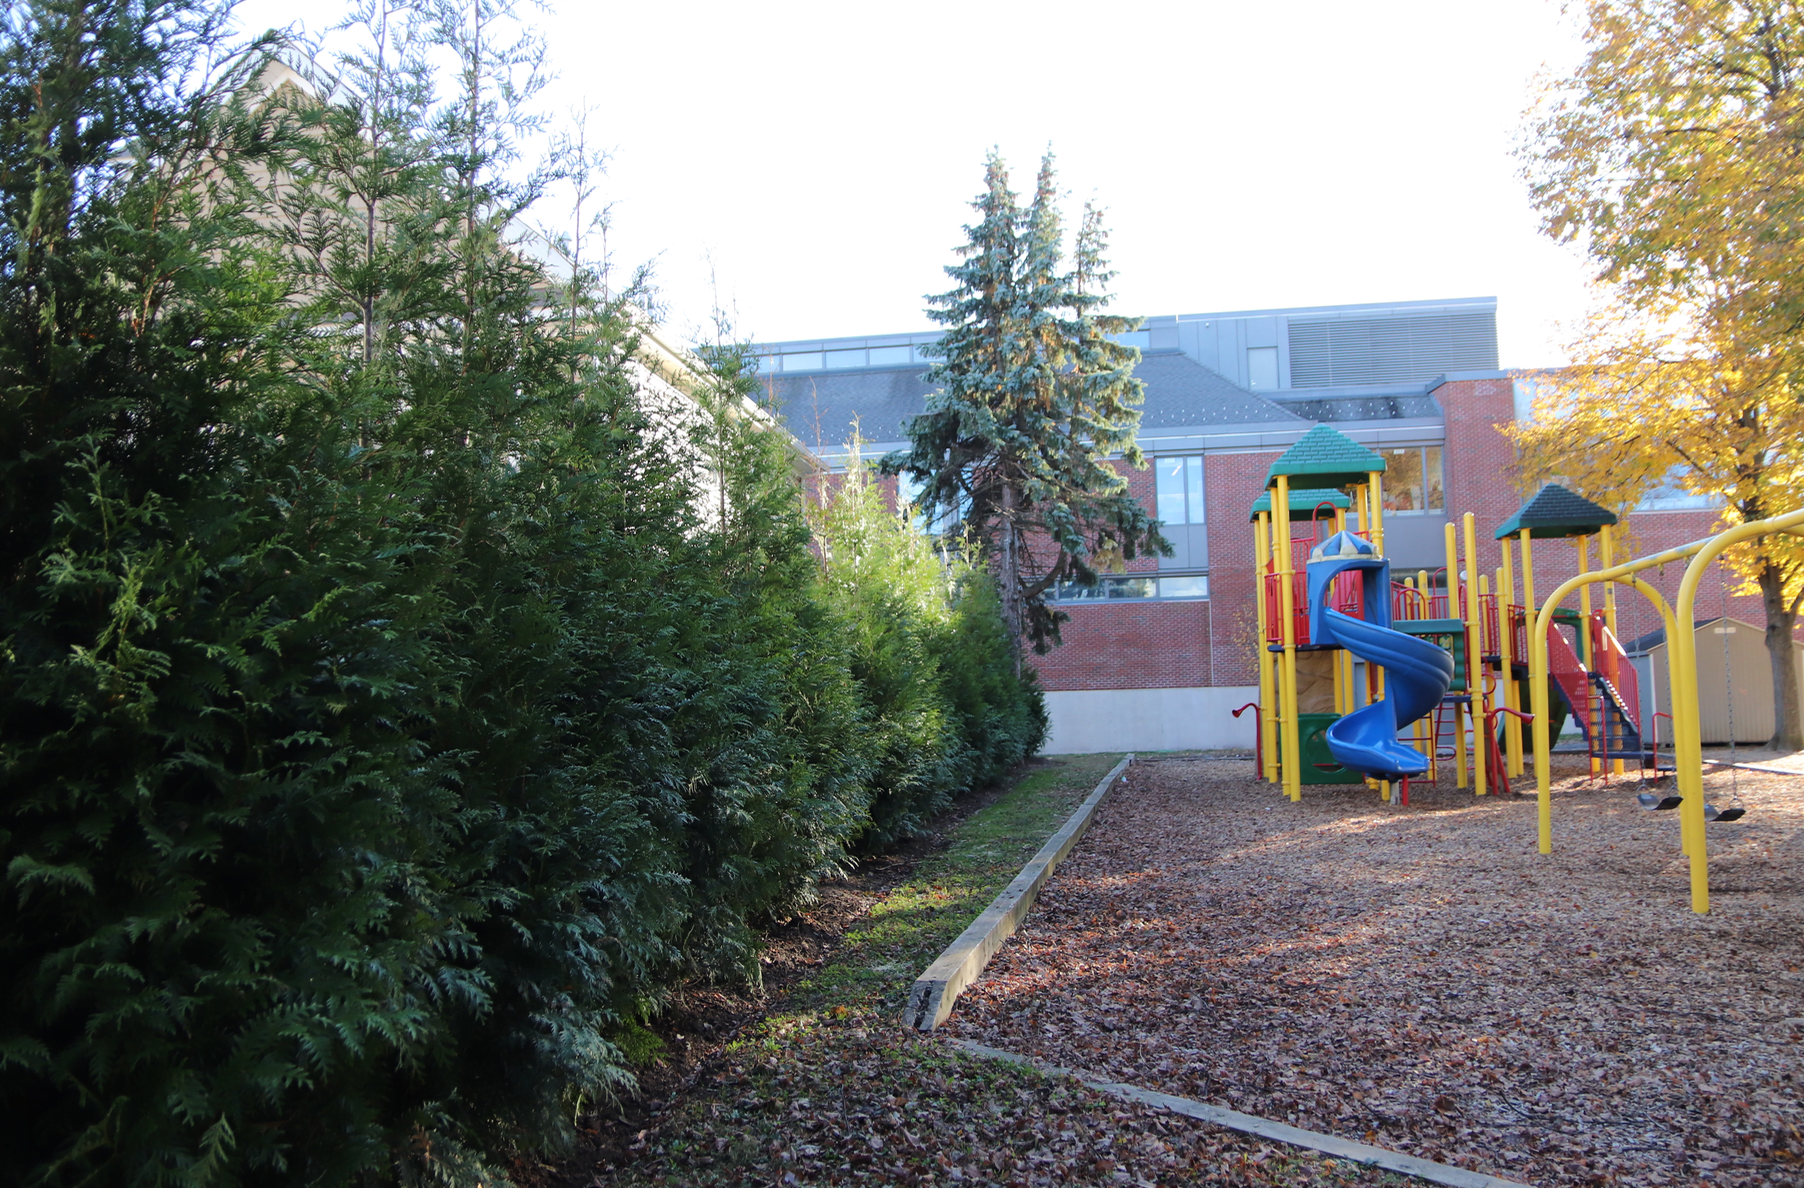 Newly planted arbor vitae along the playground at Hamilton Avenue School. October, 2019 Photo: Leslie Yager